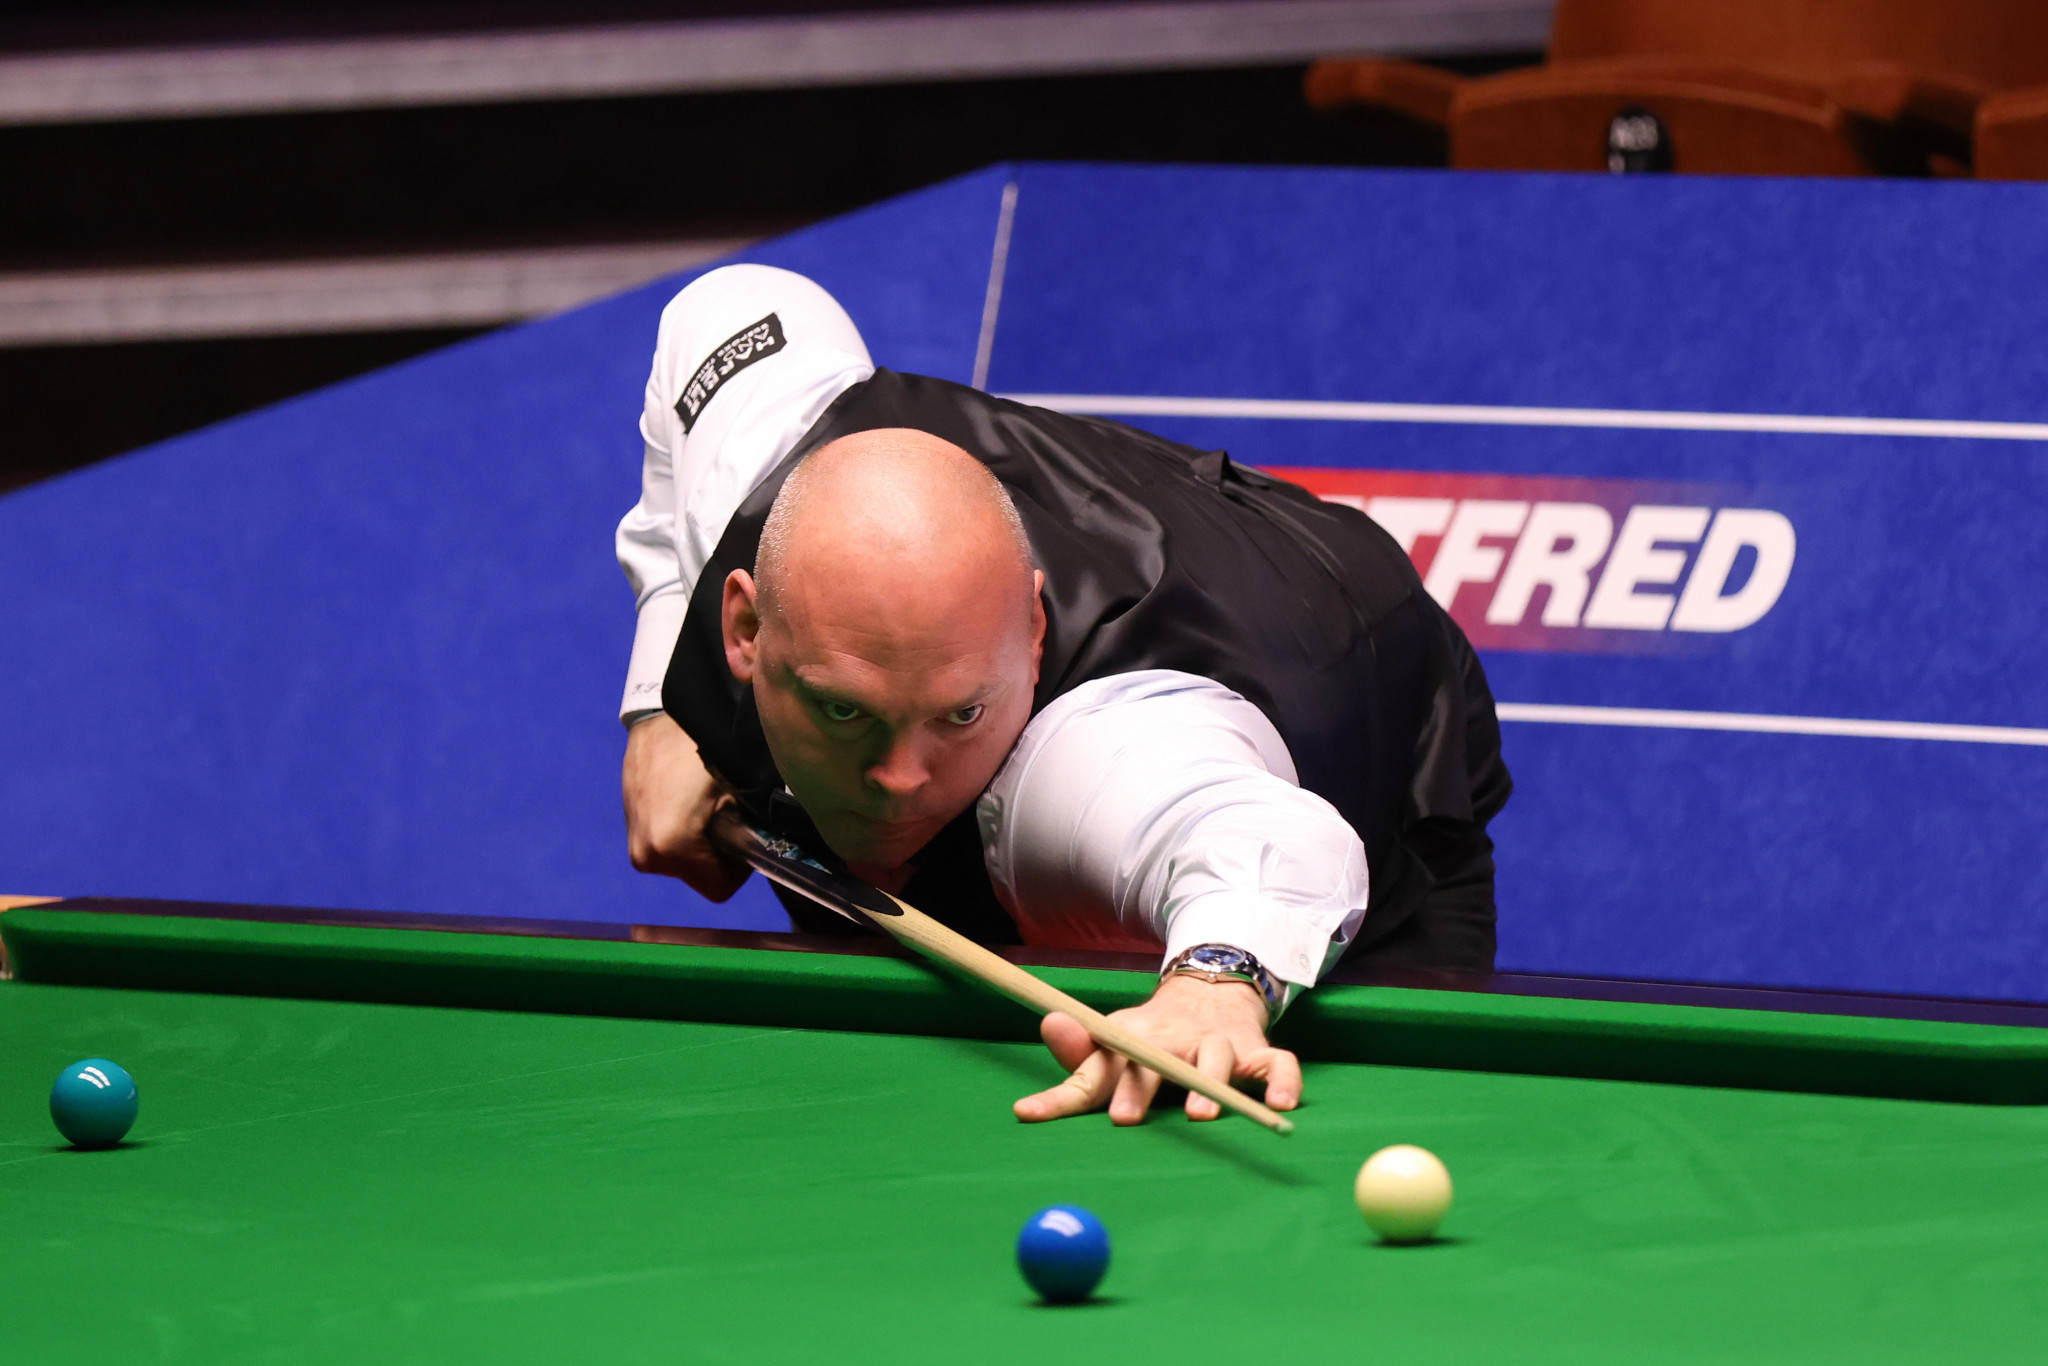 Bingham and Lisowski advance with last-frame wins at World Snooker Championship